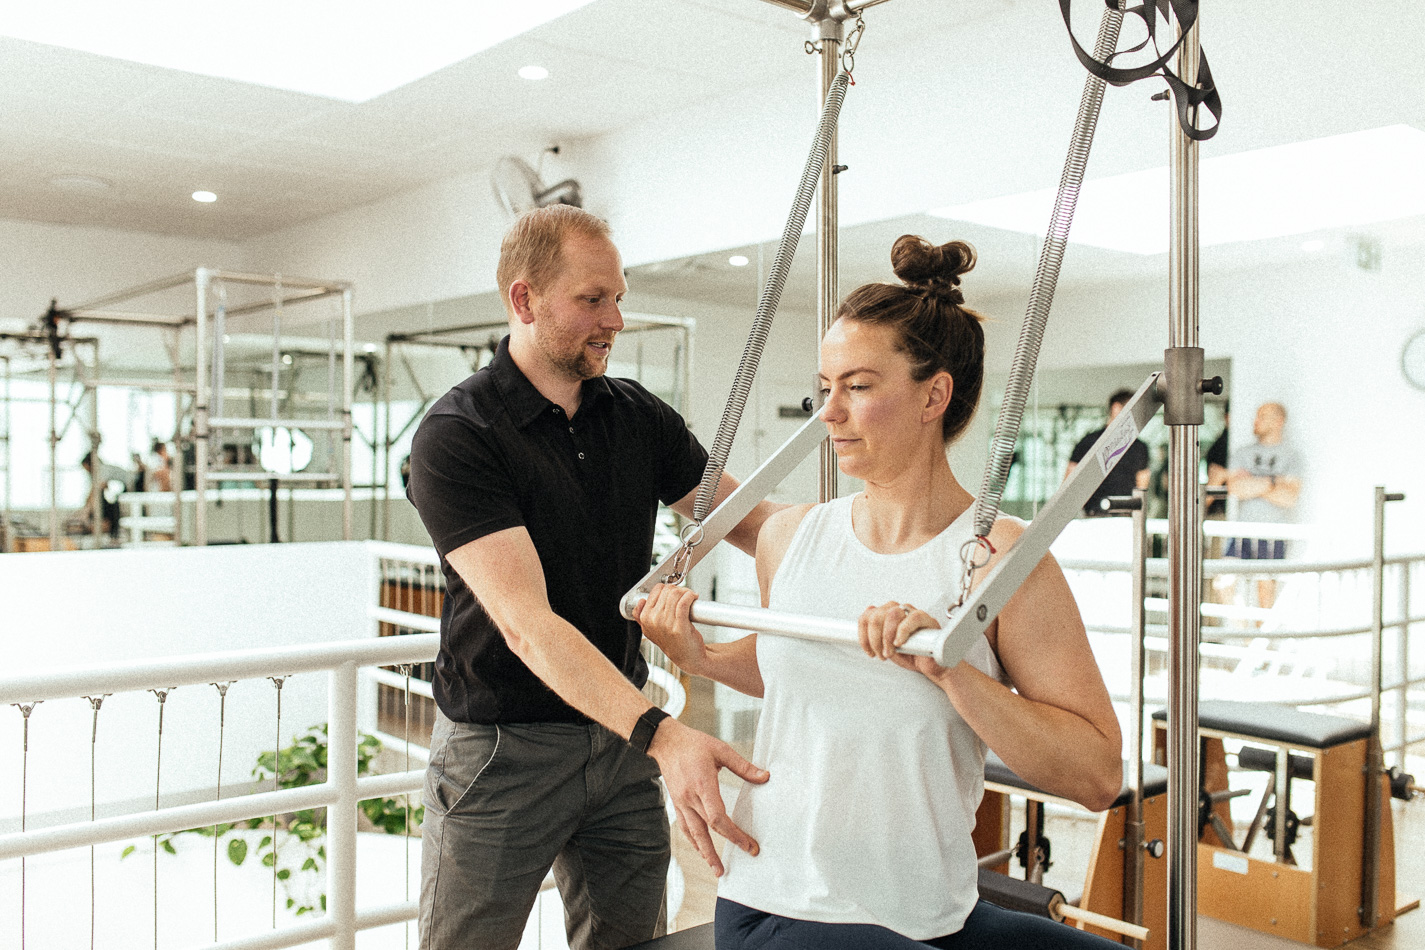 How to Improve Thoracic Mobility using Pilates Equipment